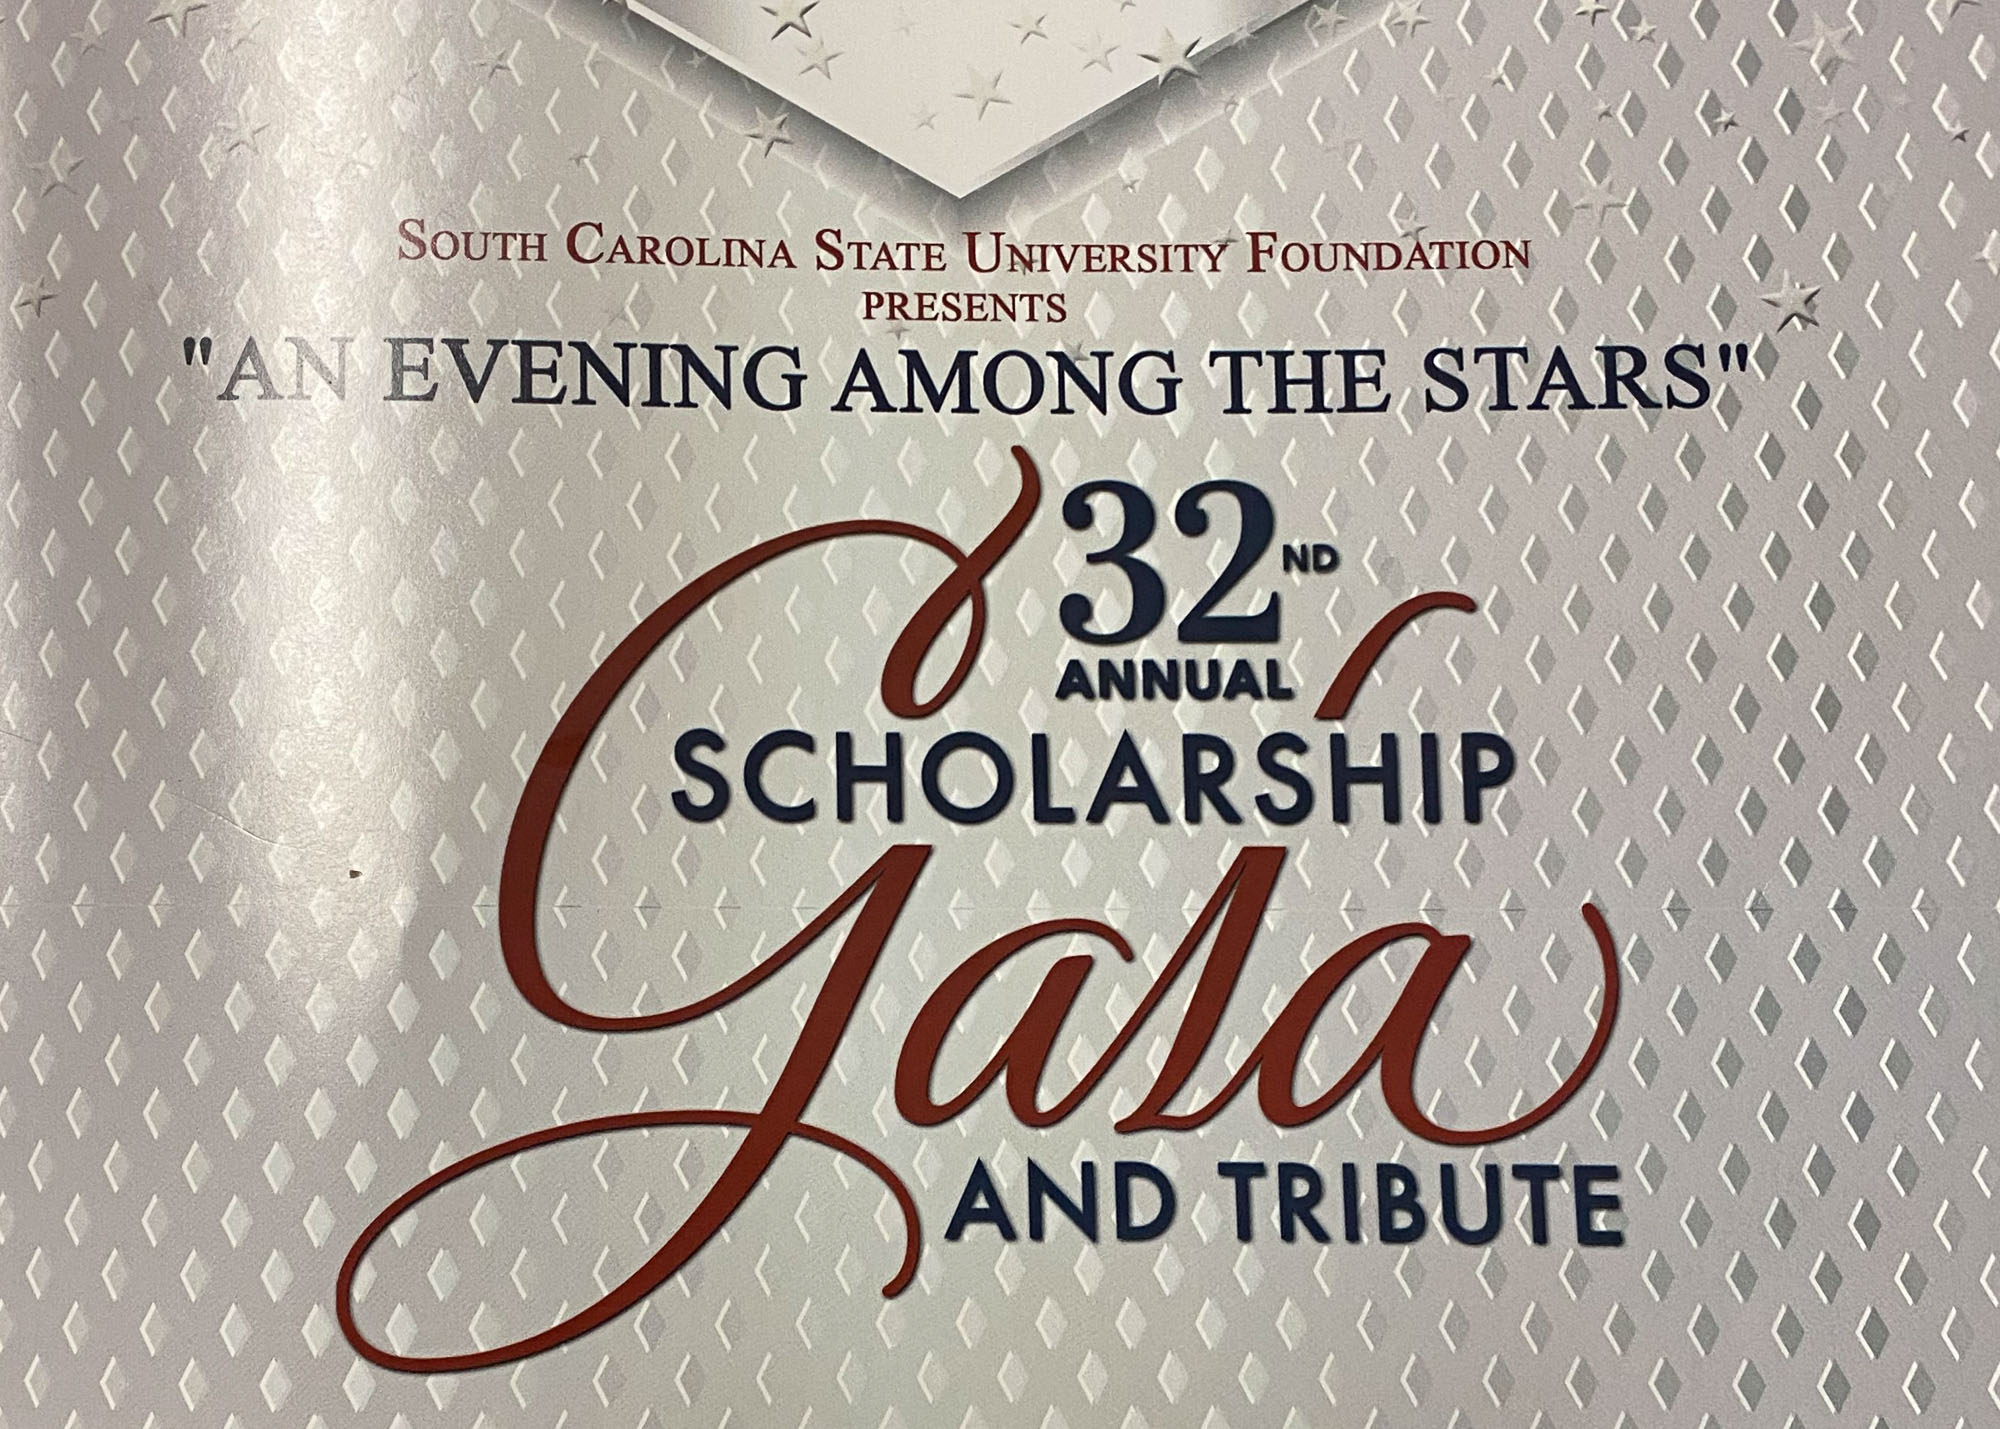 A poster for the 32nd annual scholarship gala and tribute.